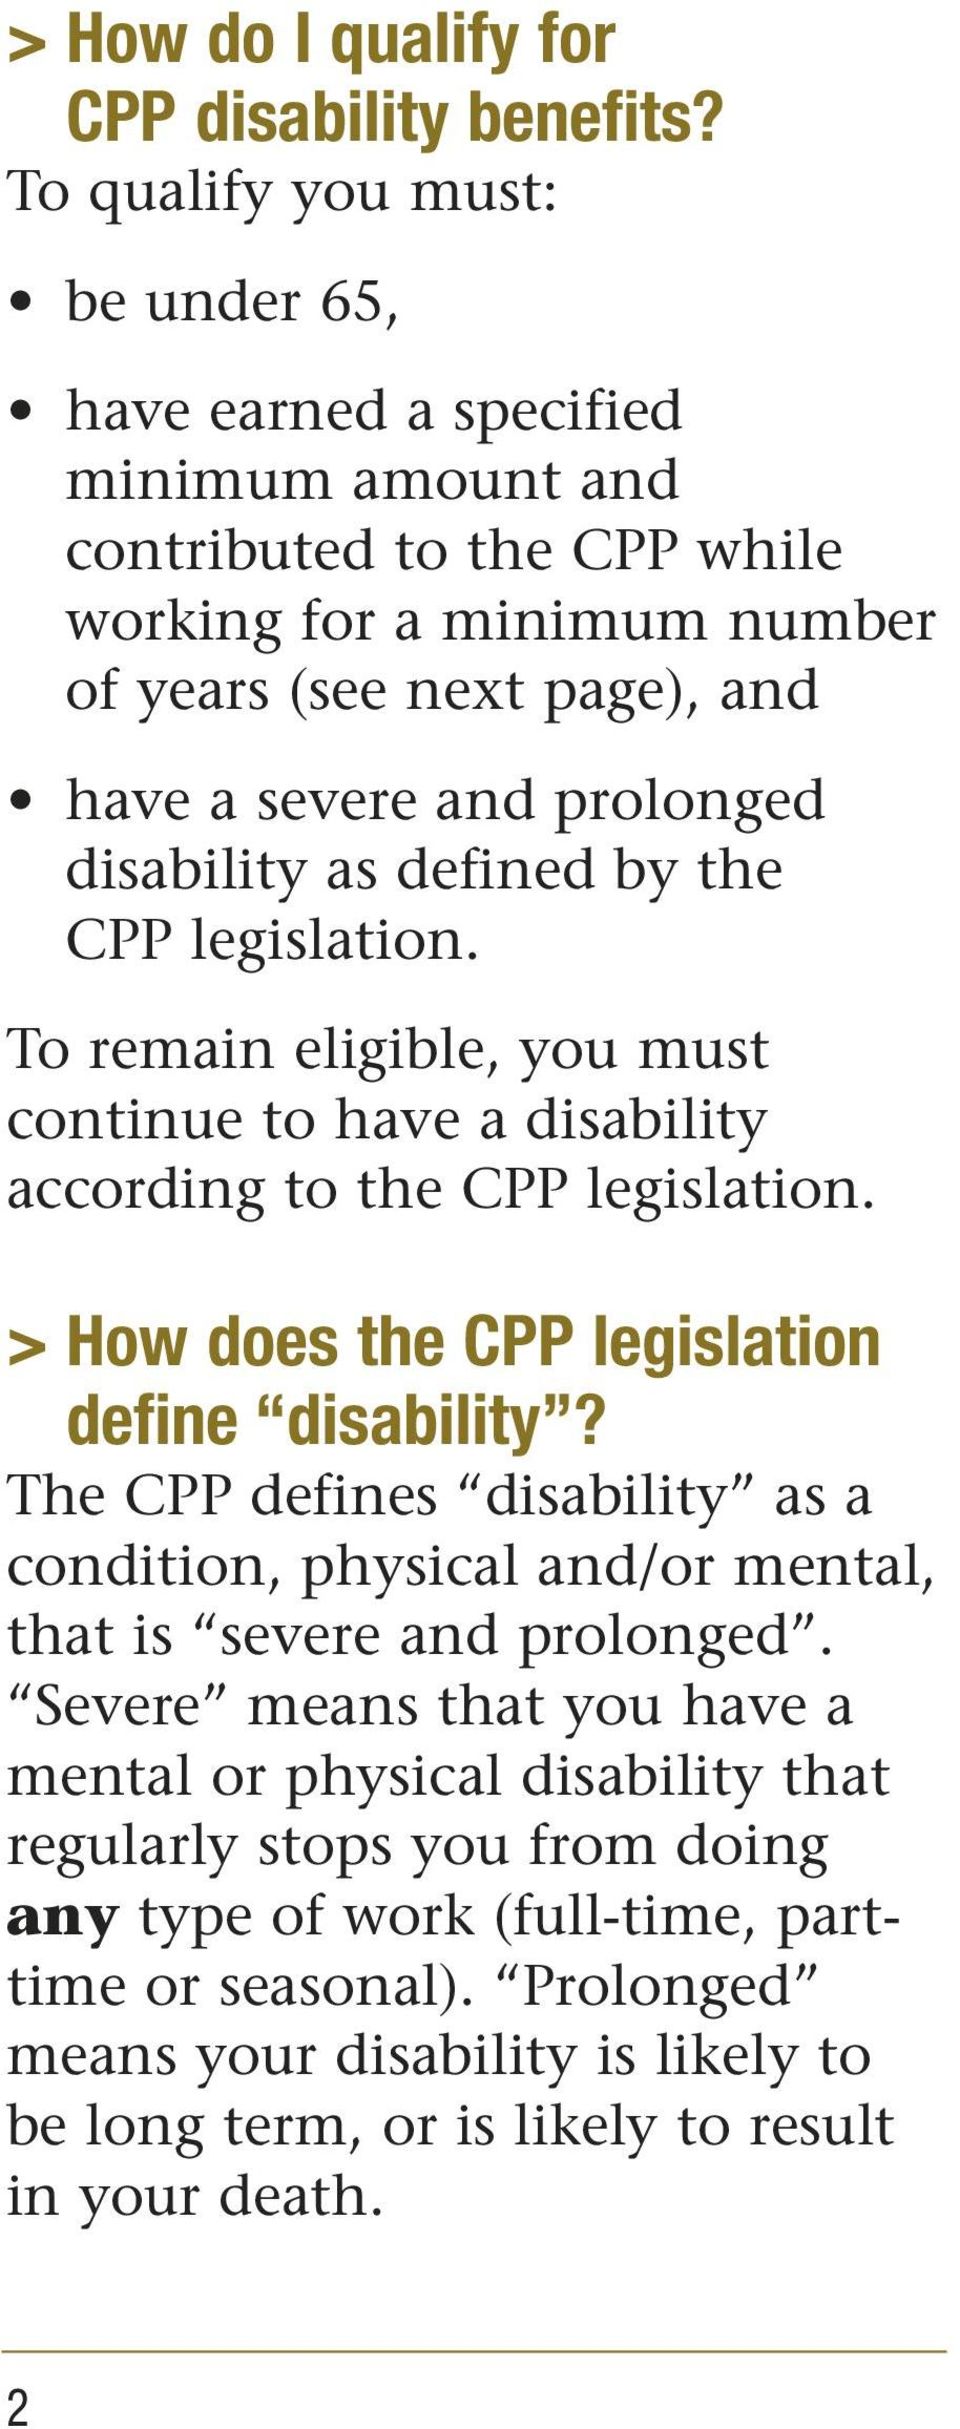 disability as defined by the CPP legislation. To remain eligible, you must continue to have a disability according to the CPP legislation. > How does the CPP legislation define disability?